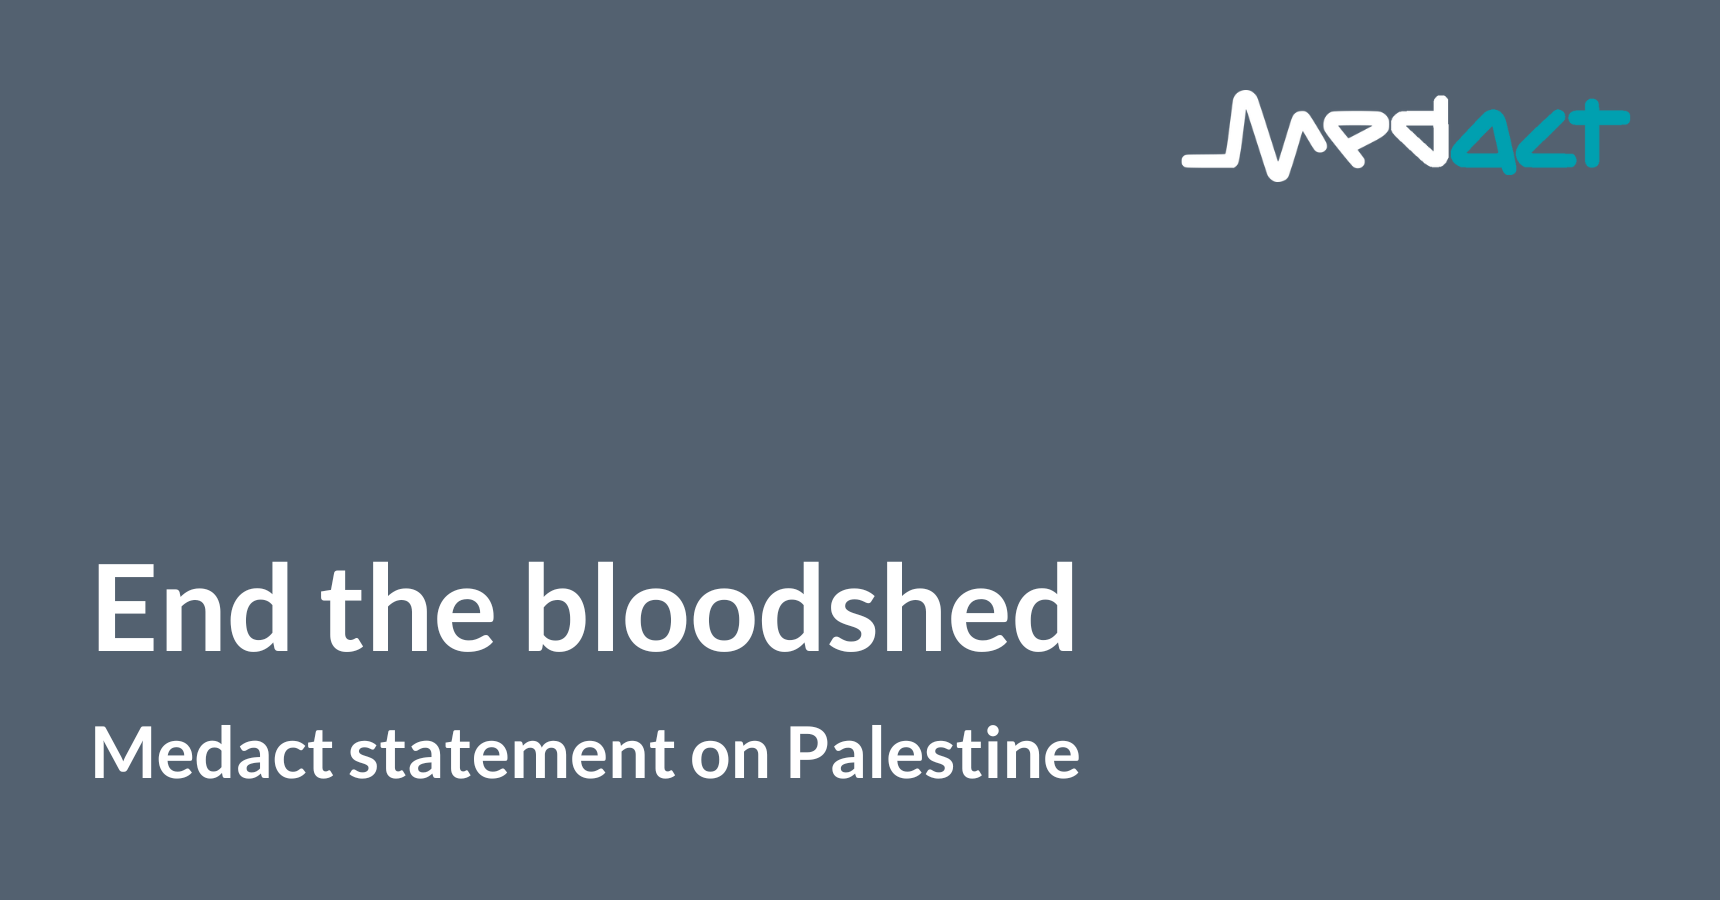 End the bloodshed: Medact statement on Palestine